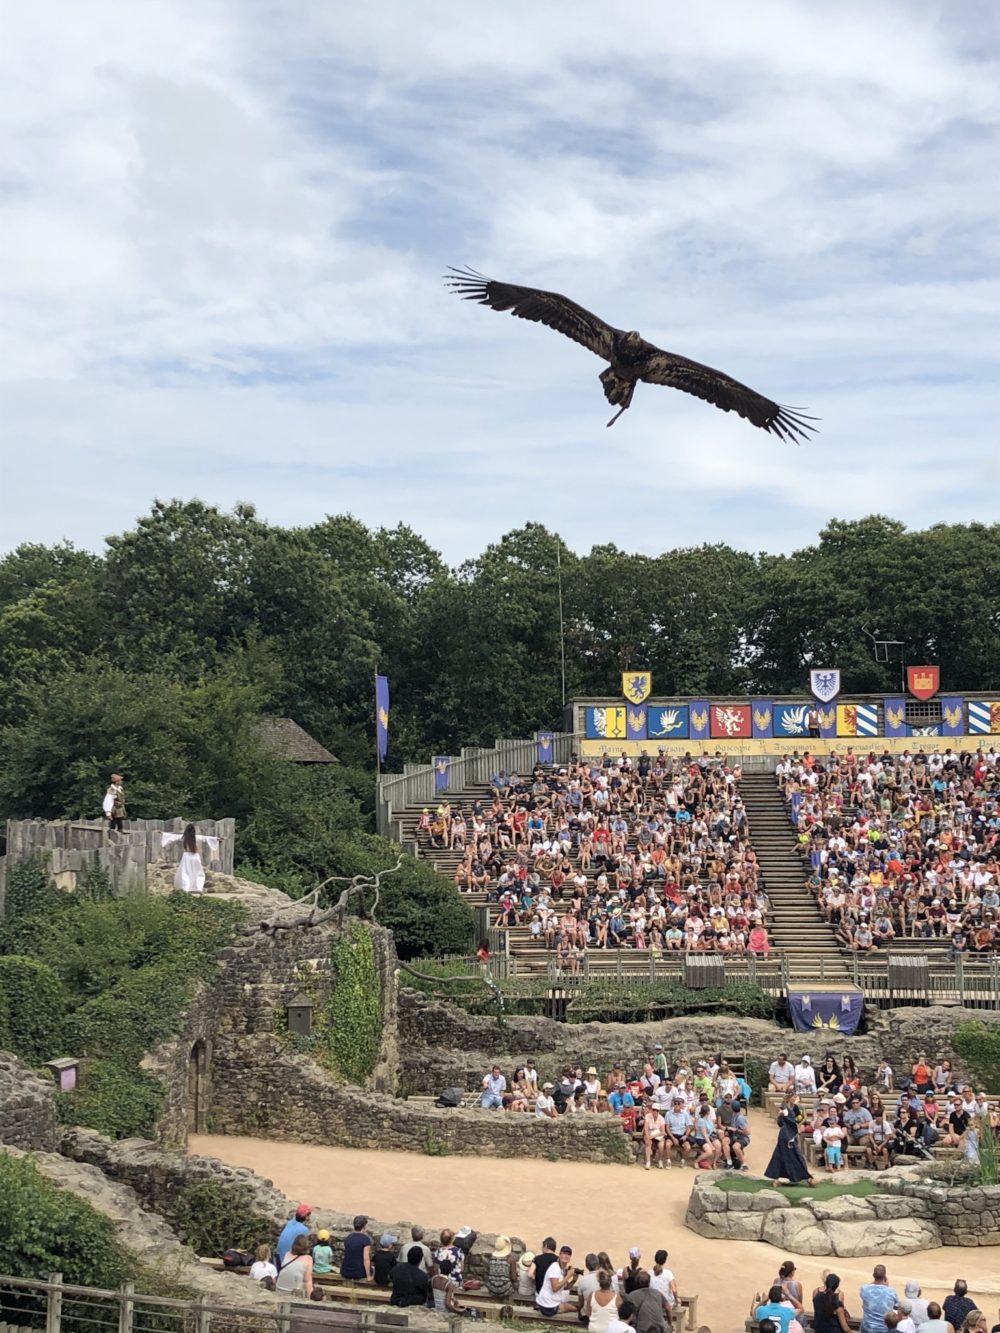 Visiting Puy du Fou with kids - all you need to know